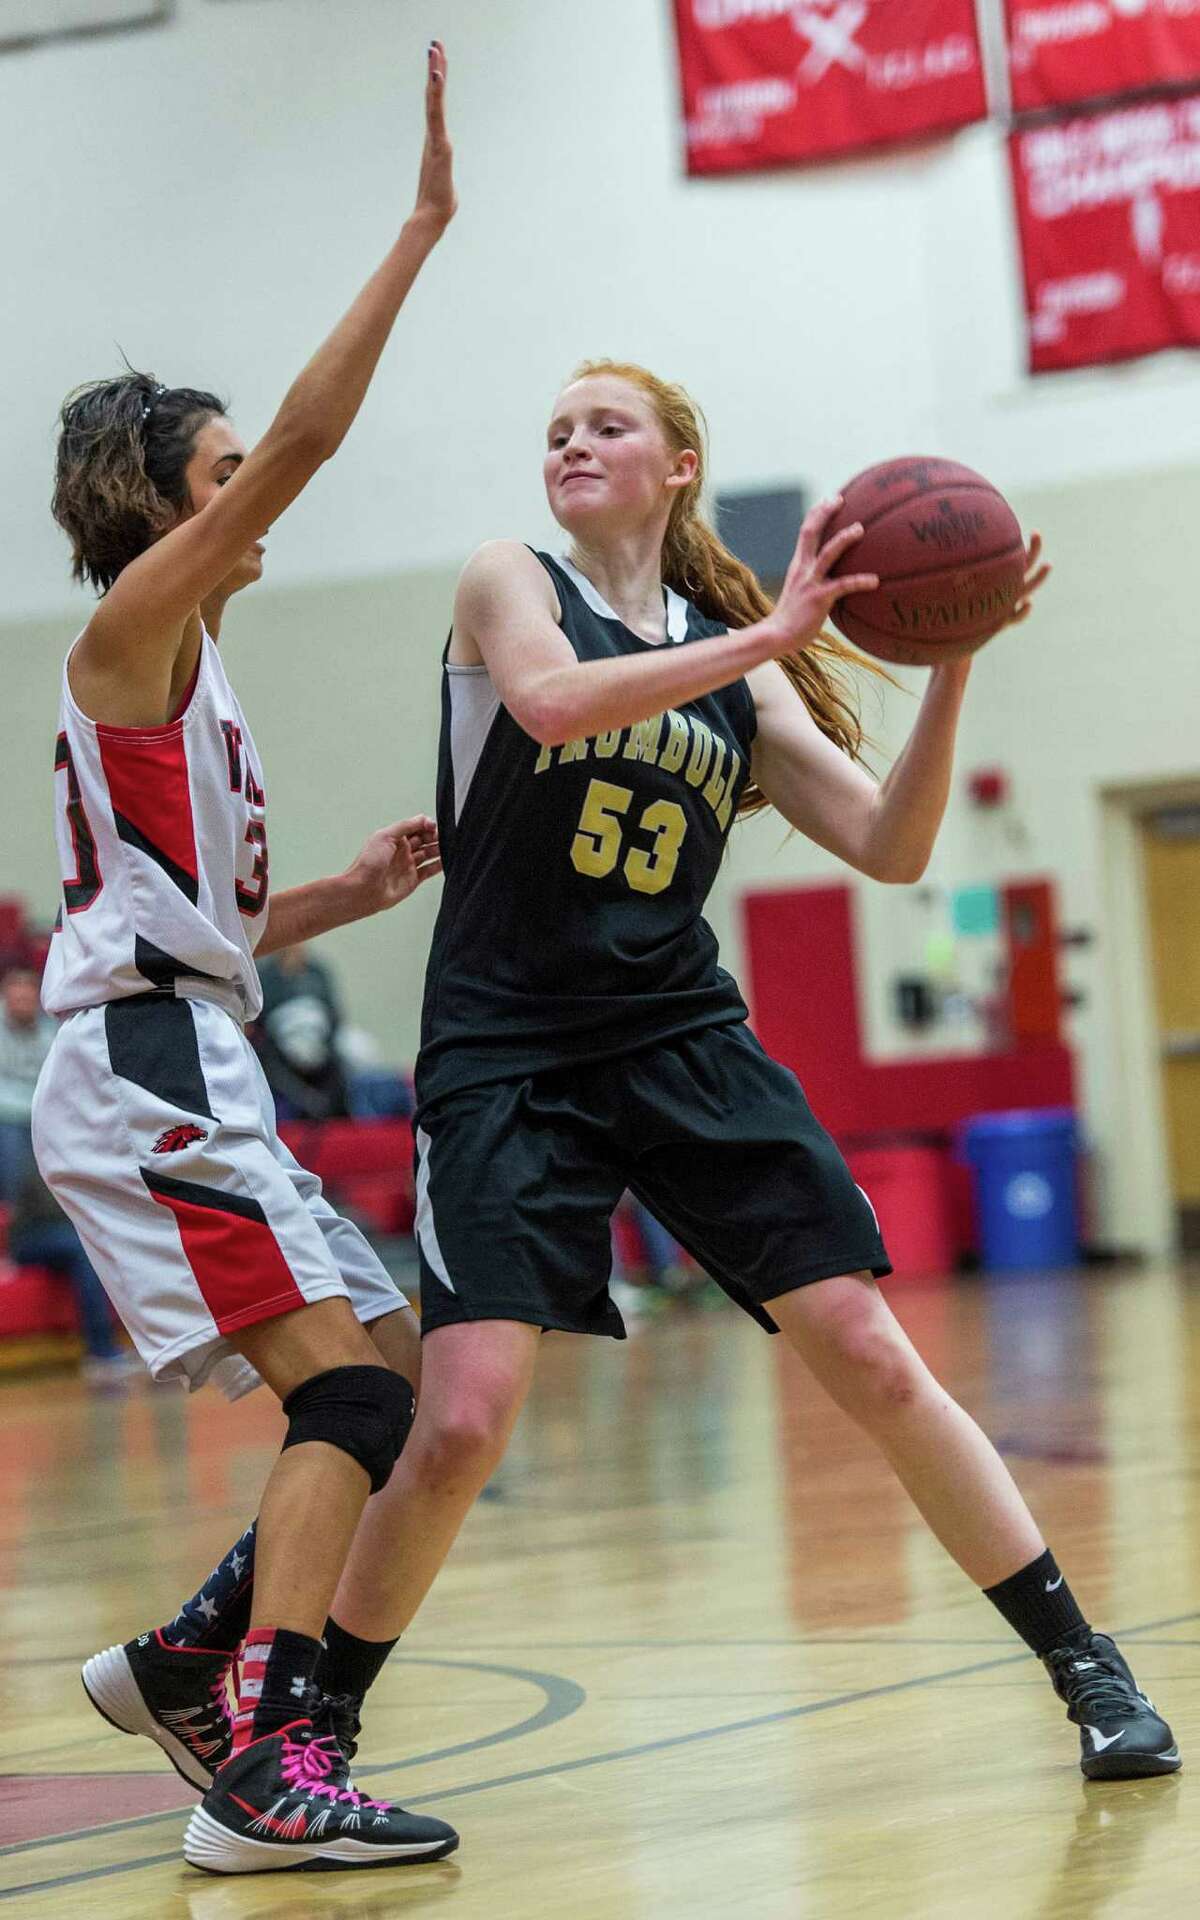 Trumbull high schoolâÄôs Taylor Brown looks for a teammate to pass to during a girls basketball game against Fairfield Warde high schoolâÄôs played at Warde high school, Fairfield, CT on Wednesday, December 9th, 2014.